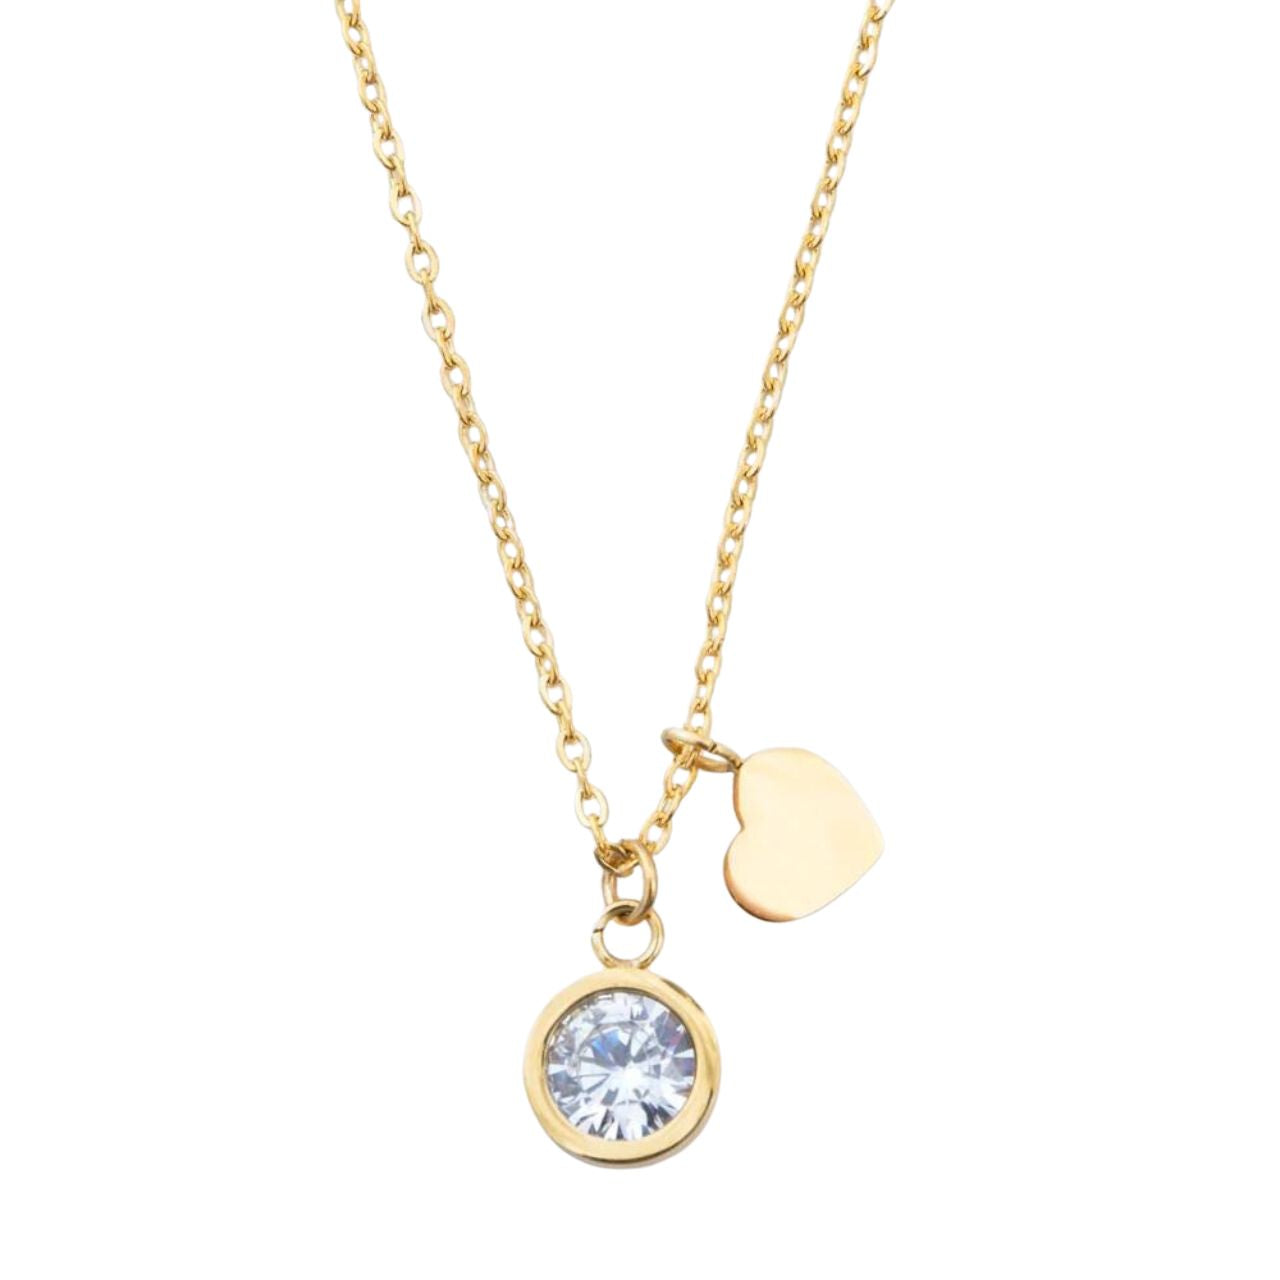 Solitaire Pendant by Knight & Day  Beautiful solitaire with simple heart charm.  Length 41 + 5cm extension. Gold plating.